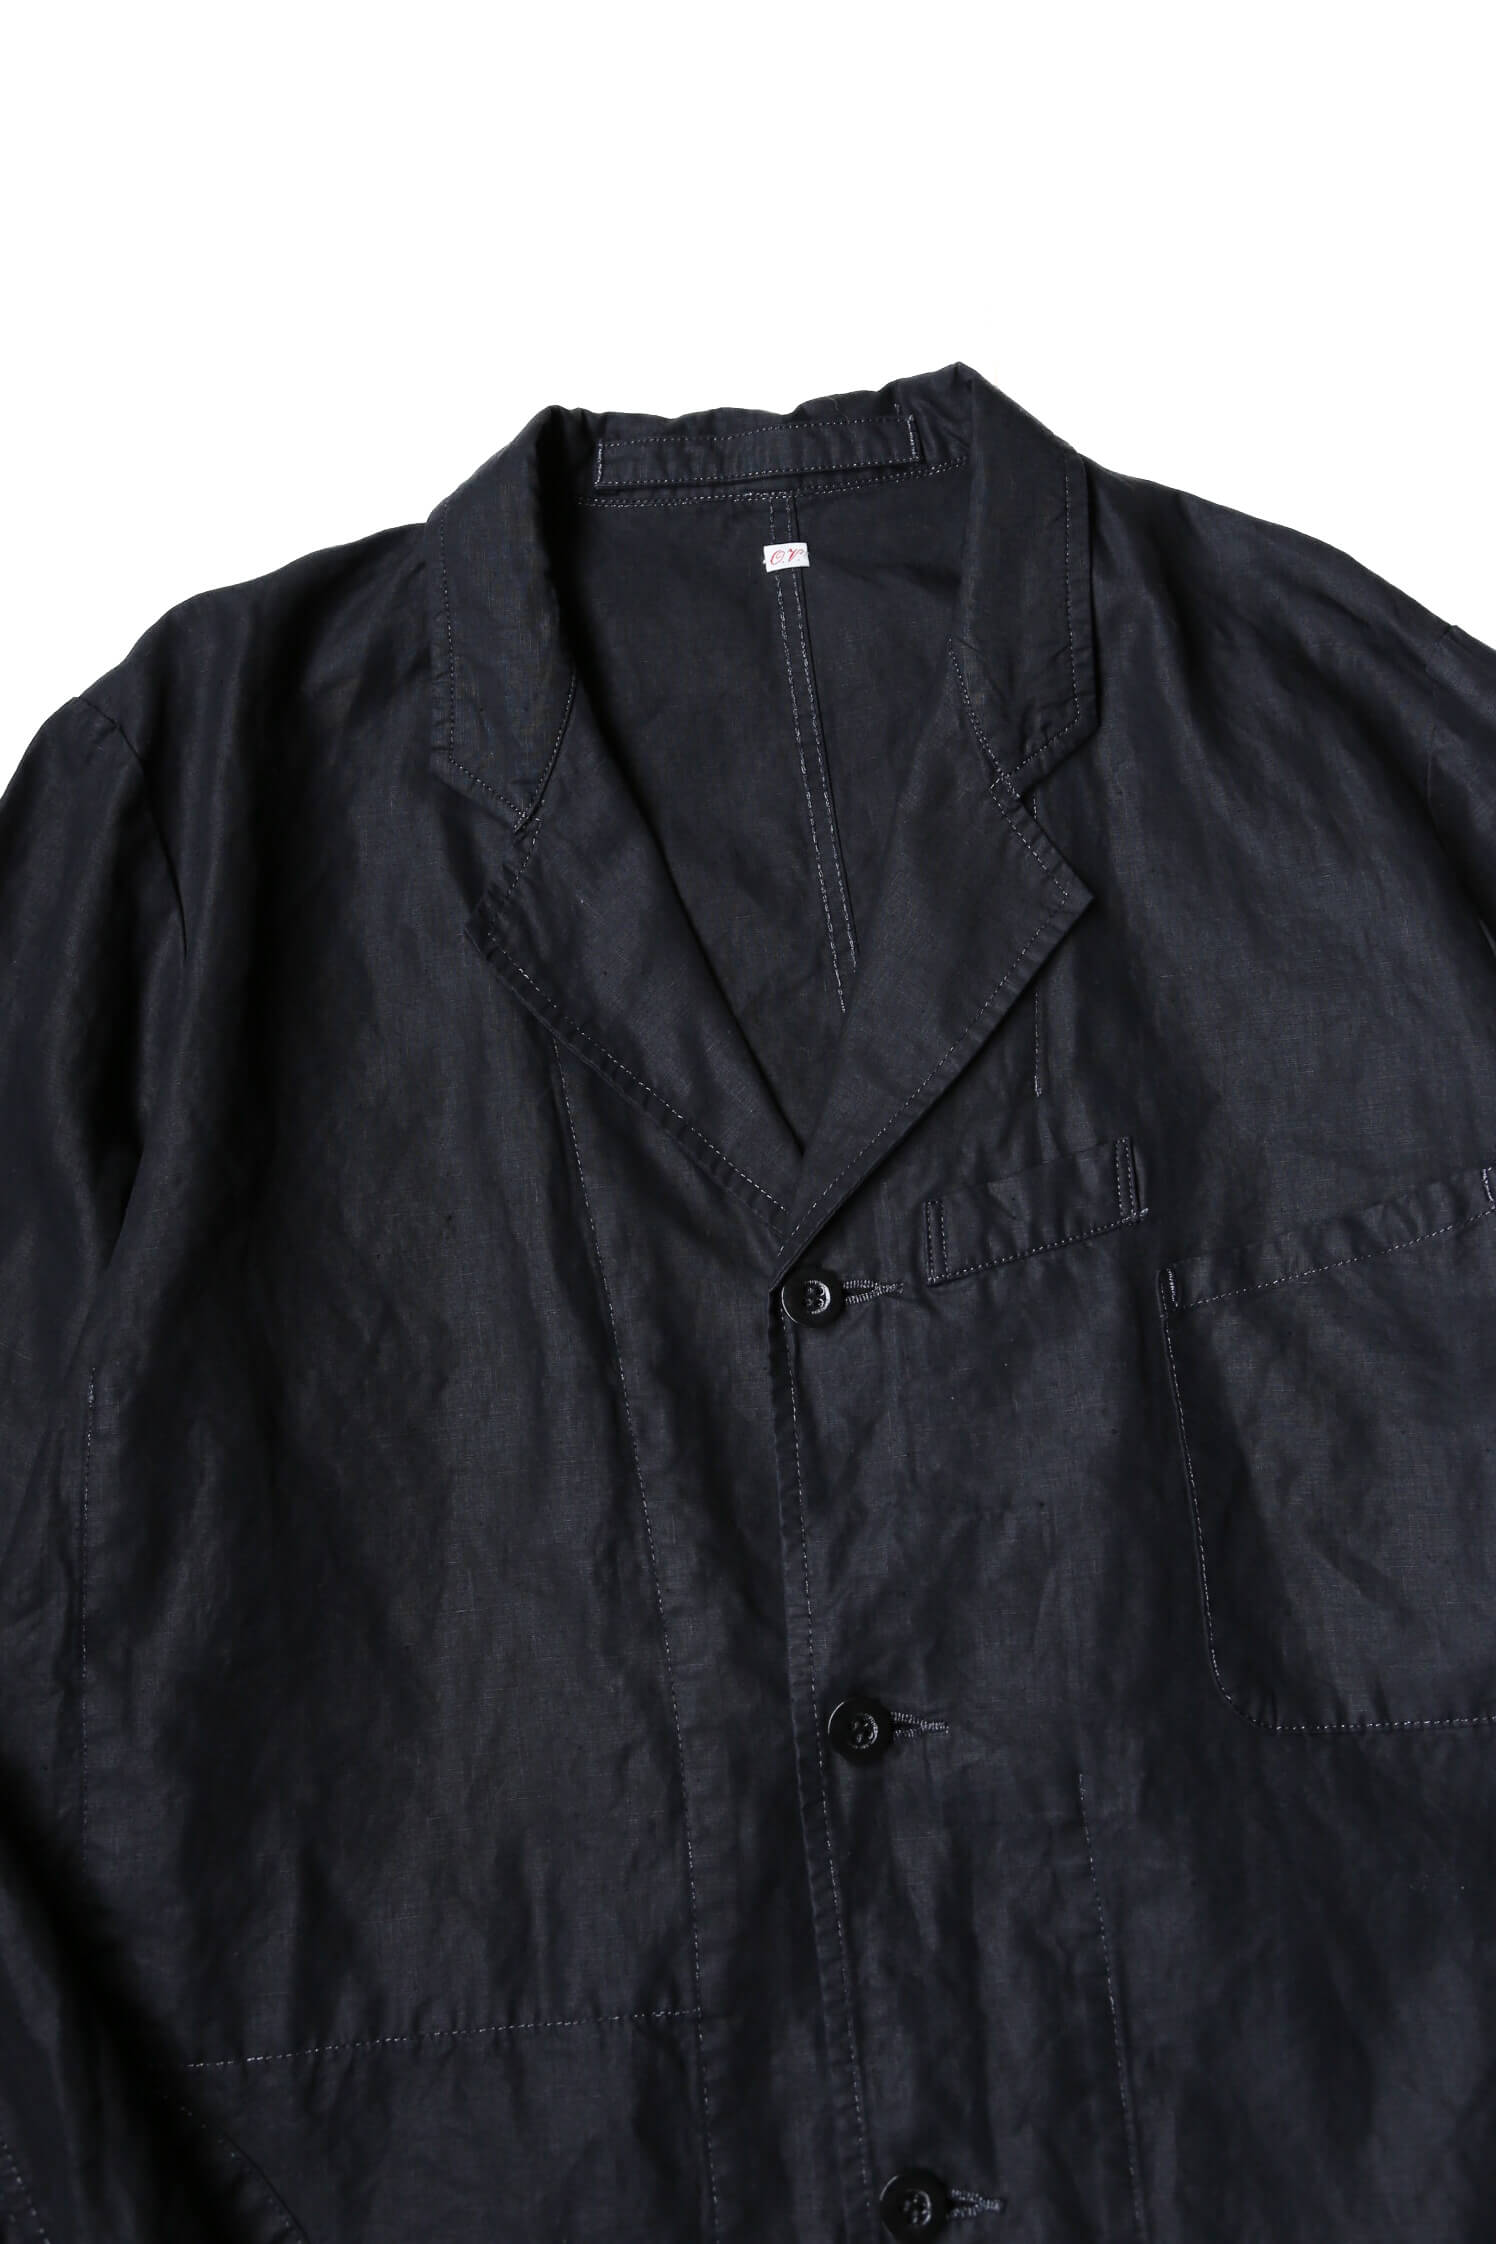 MANTEAU CHATEAUGAY - BLACK